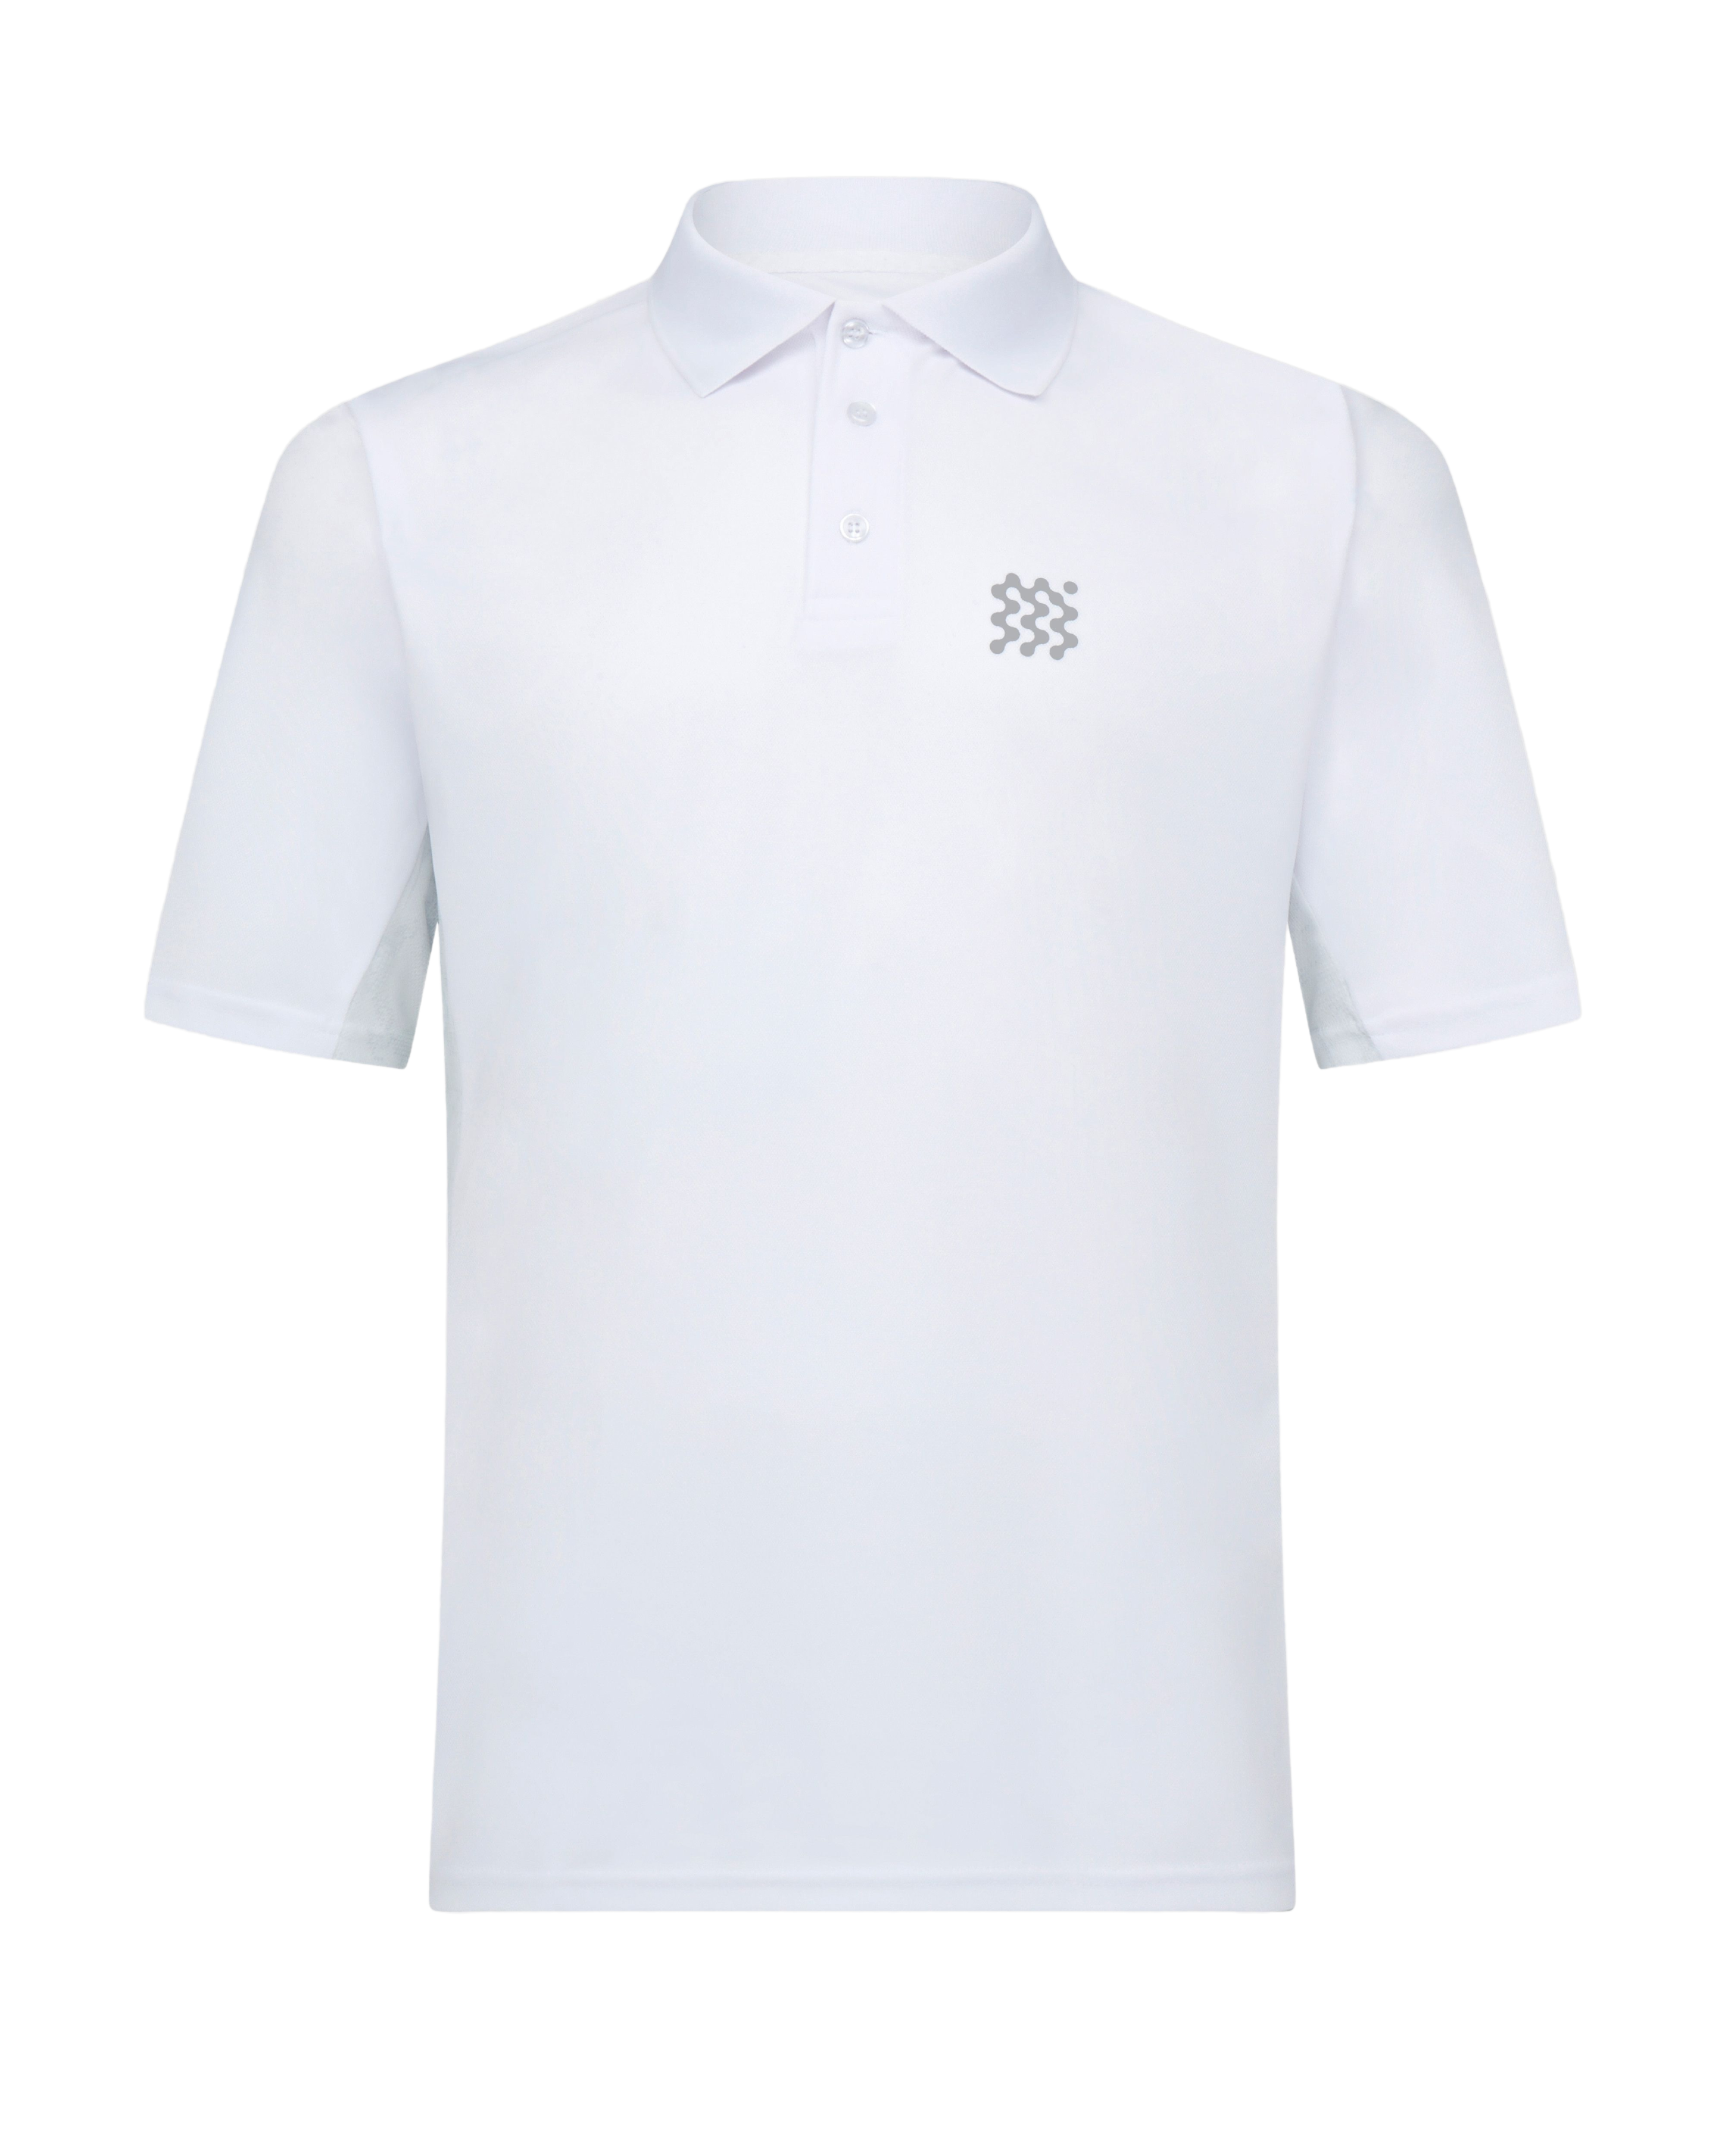 MANORS Men's The Course Polo